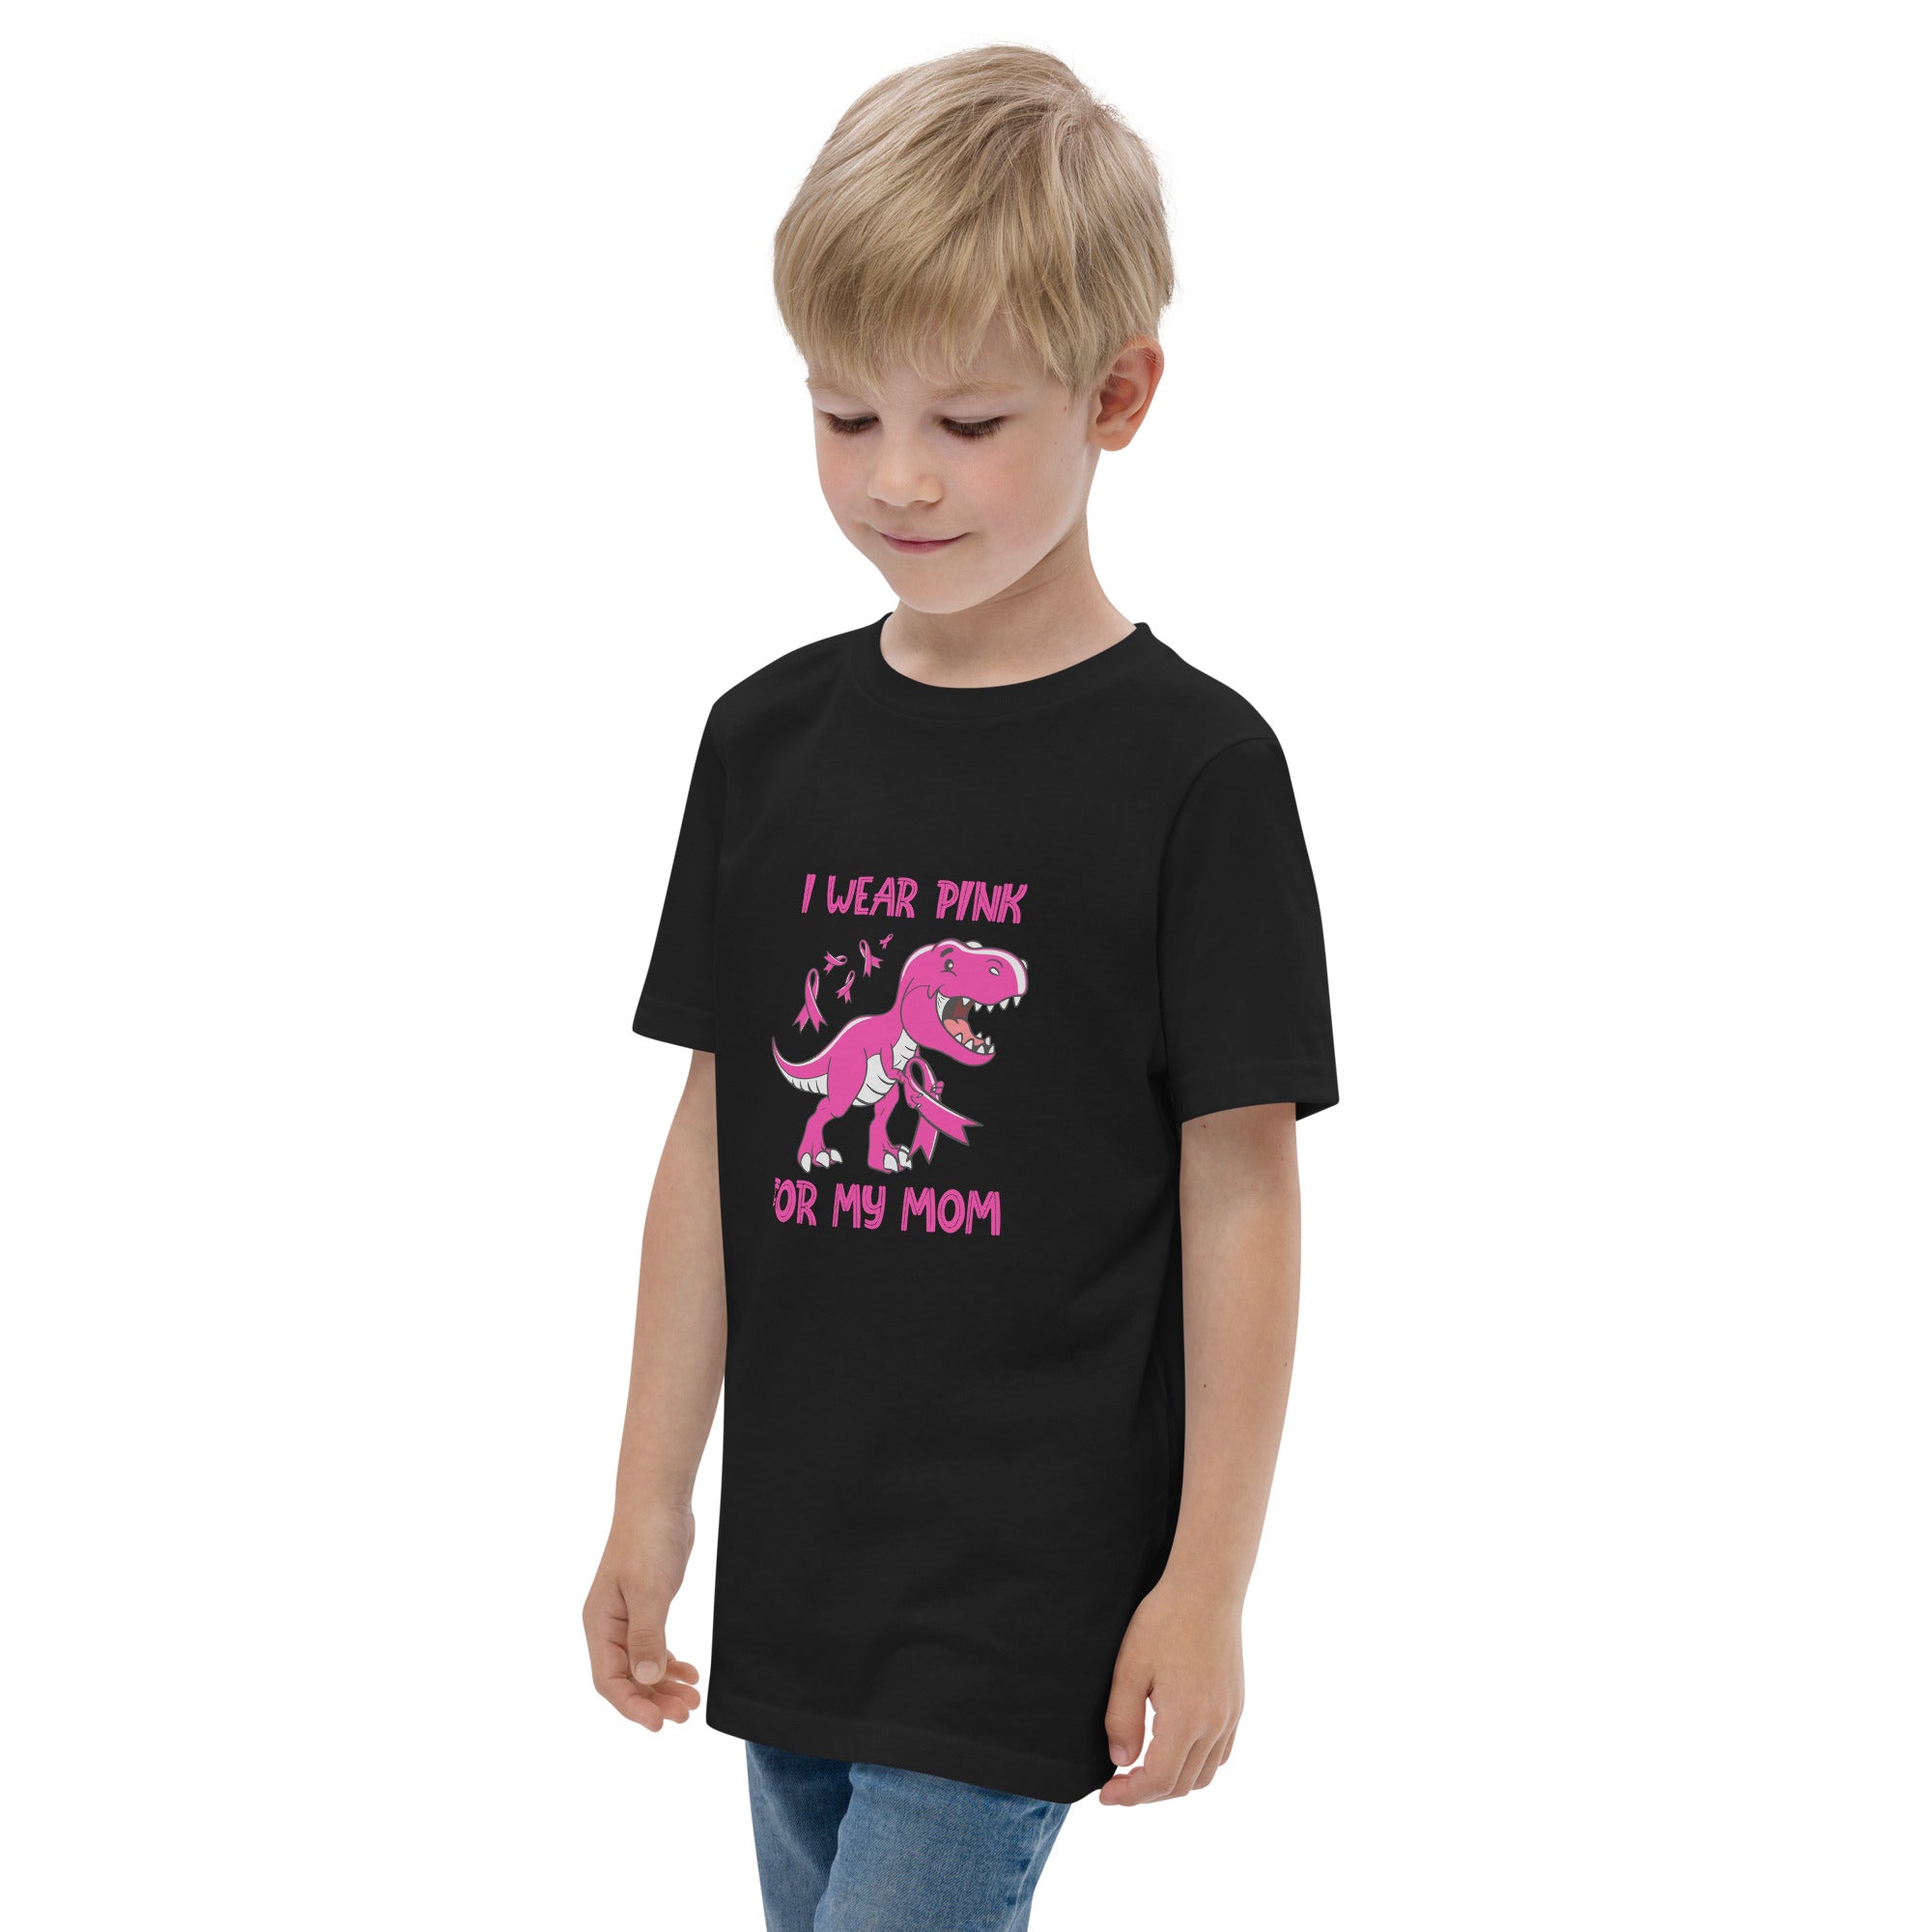 I Wear Pink For My Mom Youth jersey t-shirt